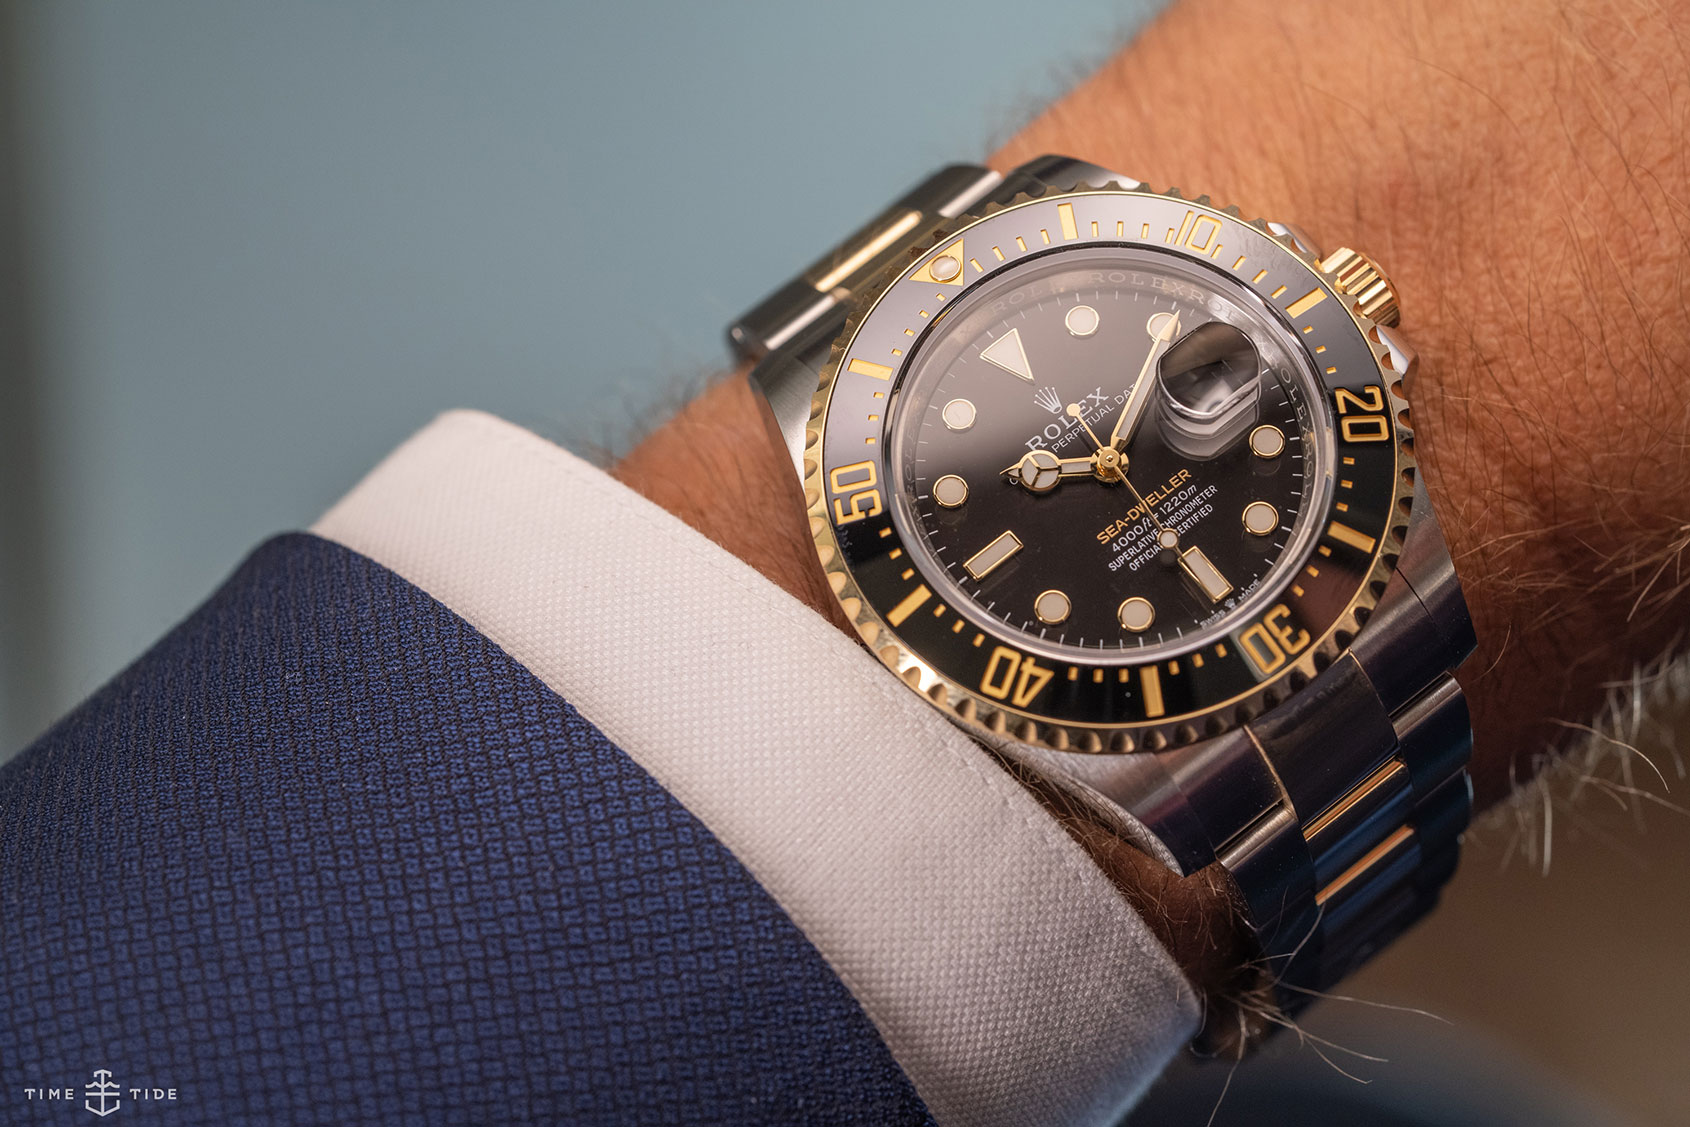 tub forum Tilfredsstille Best of both worlds: 3 excellent two-tone watches released in 2019